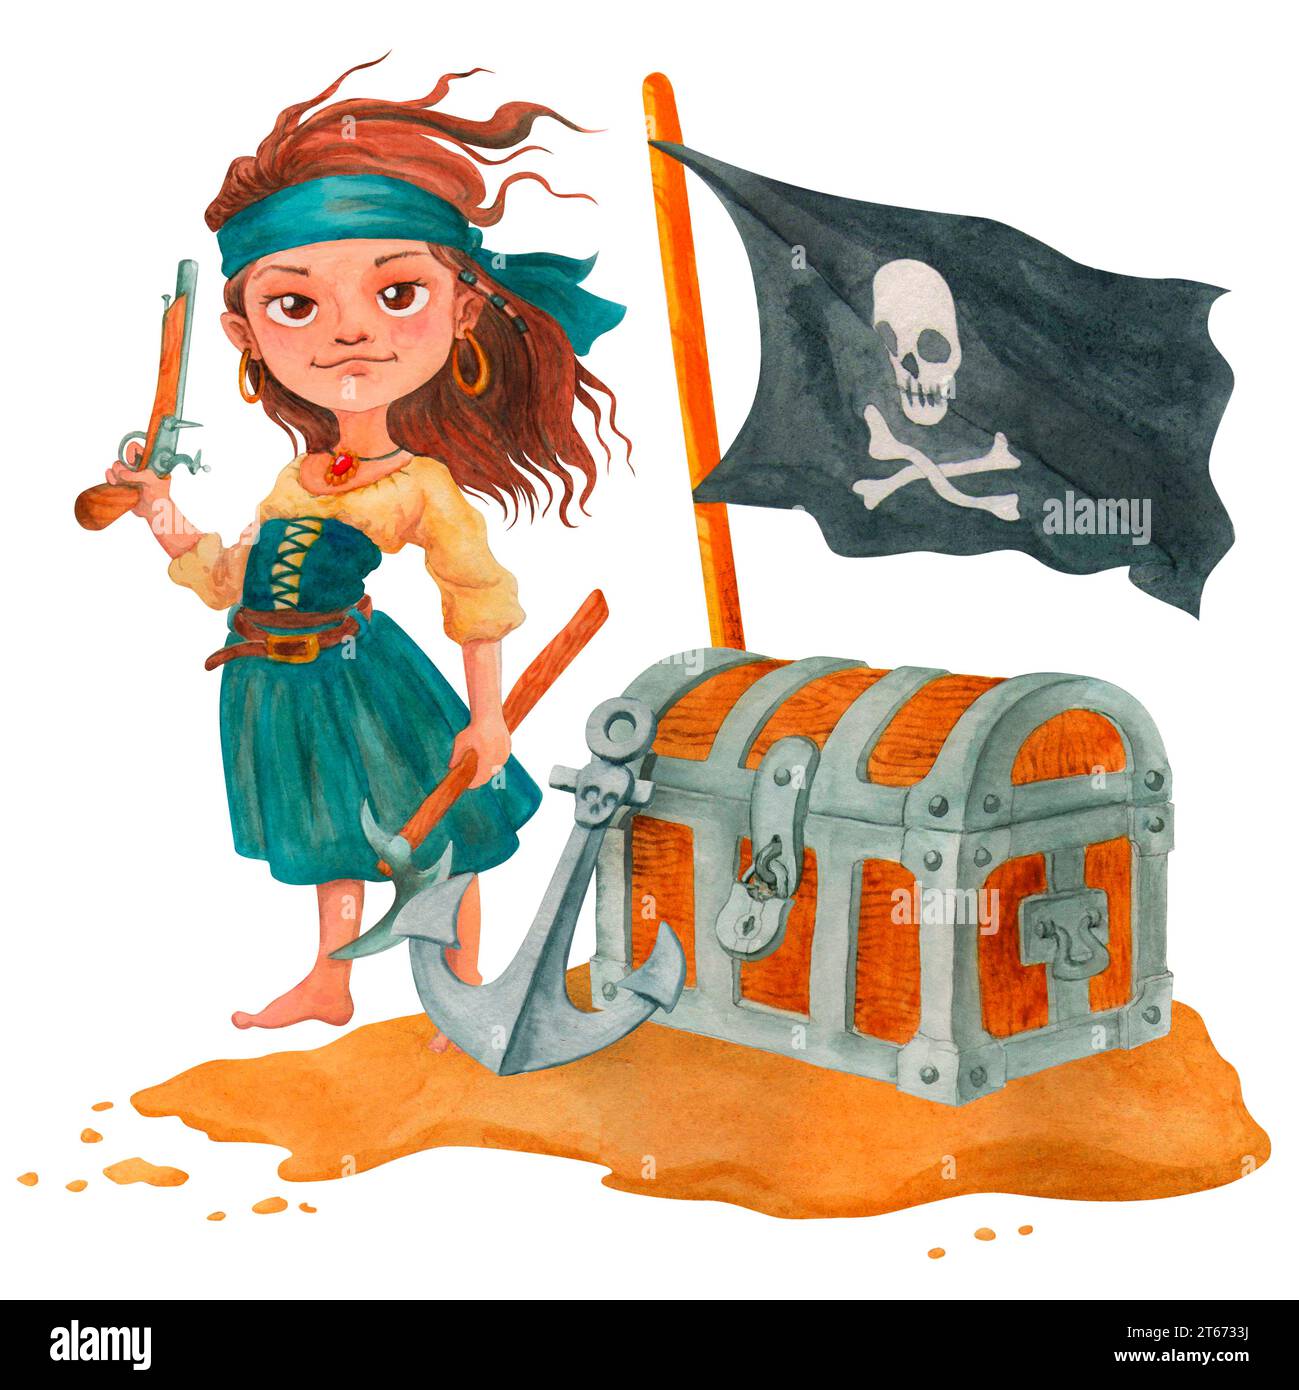 Pirate girl cartoon character in pirate object composition. Includes black flag, chest, anchor, weapon. Isolated watercolor illustration for design Stock Photo